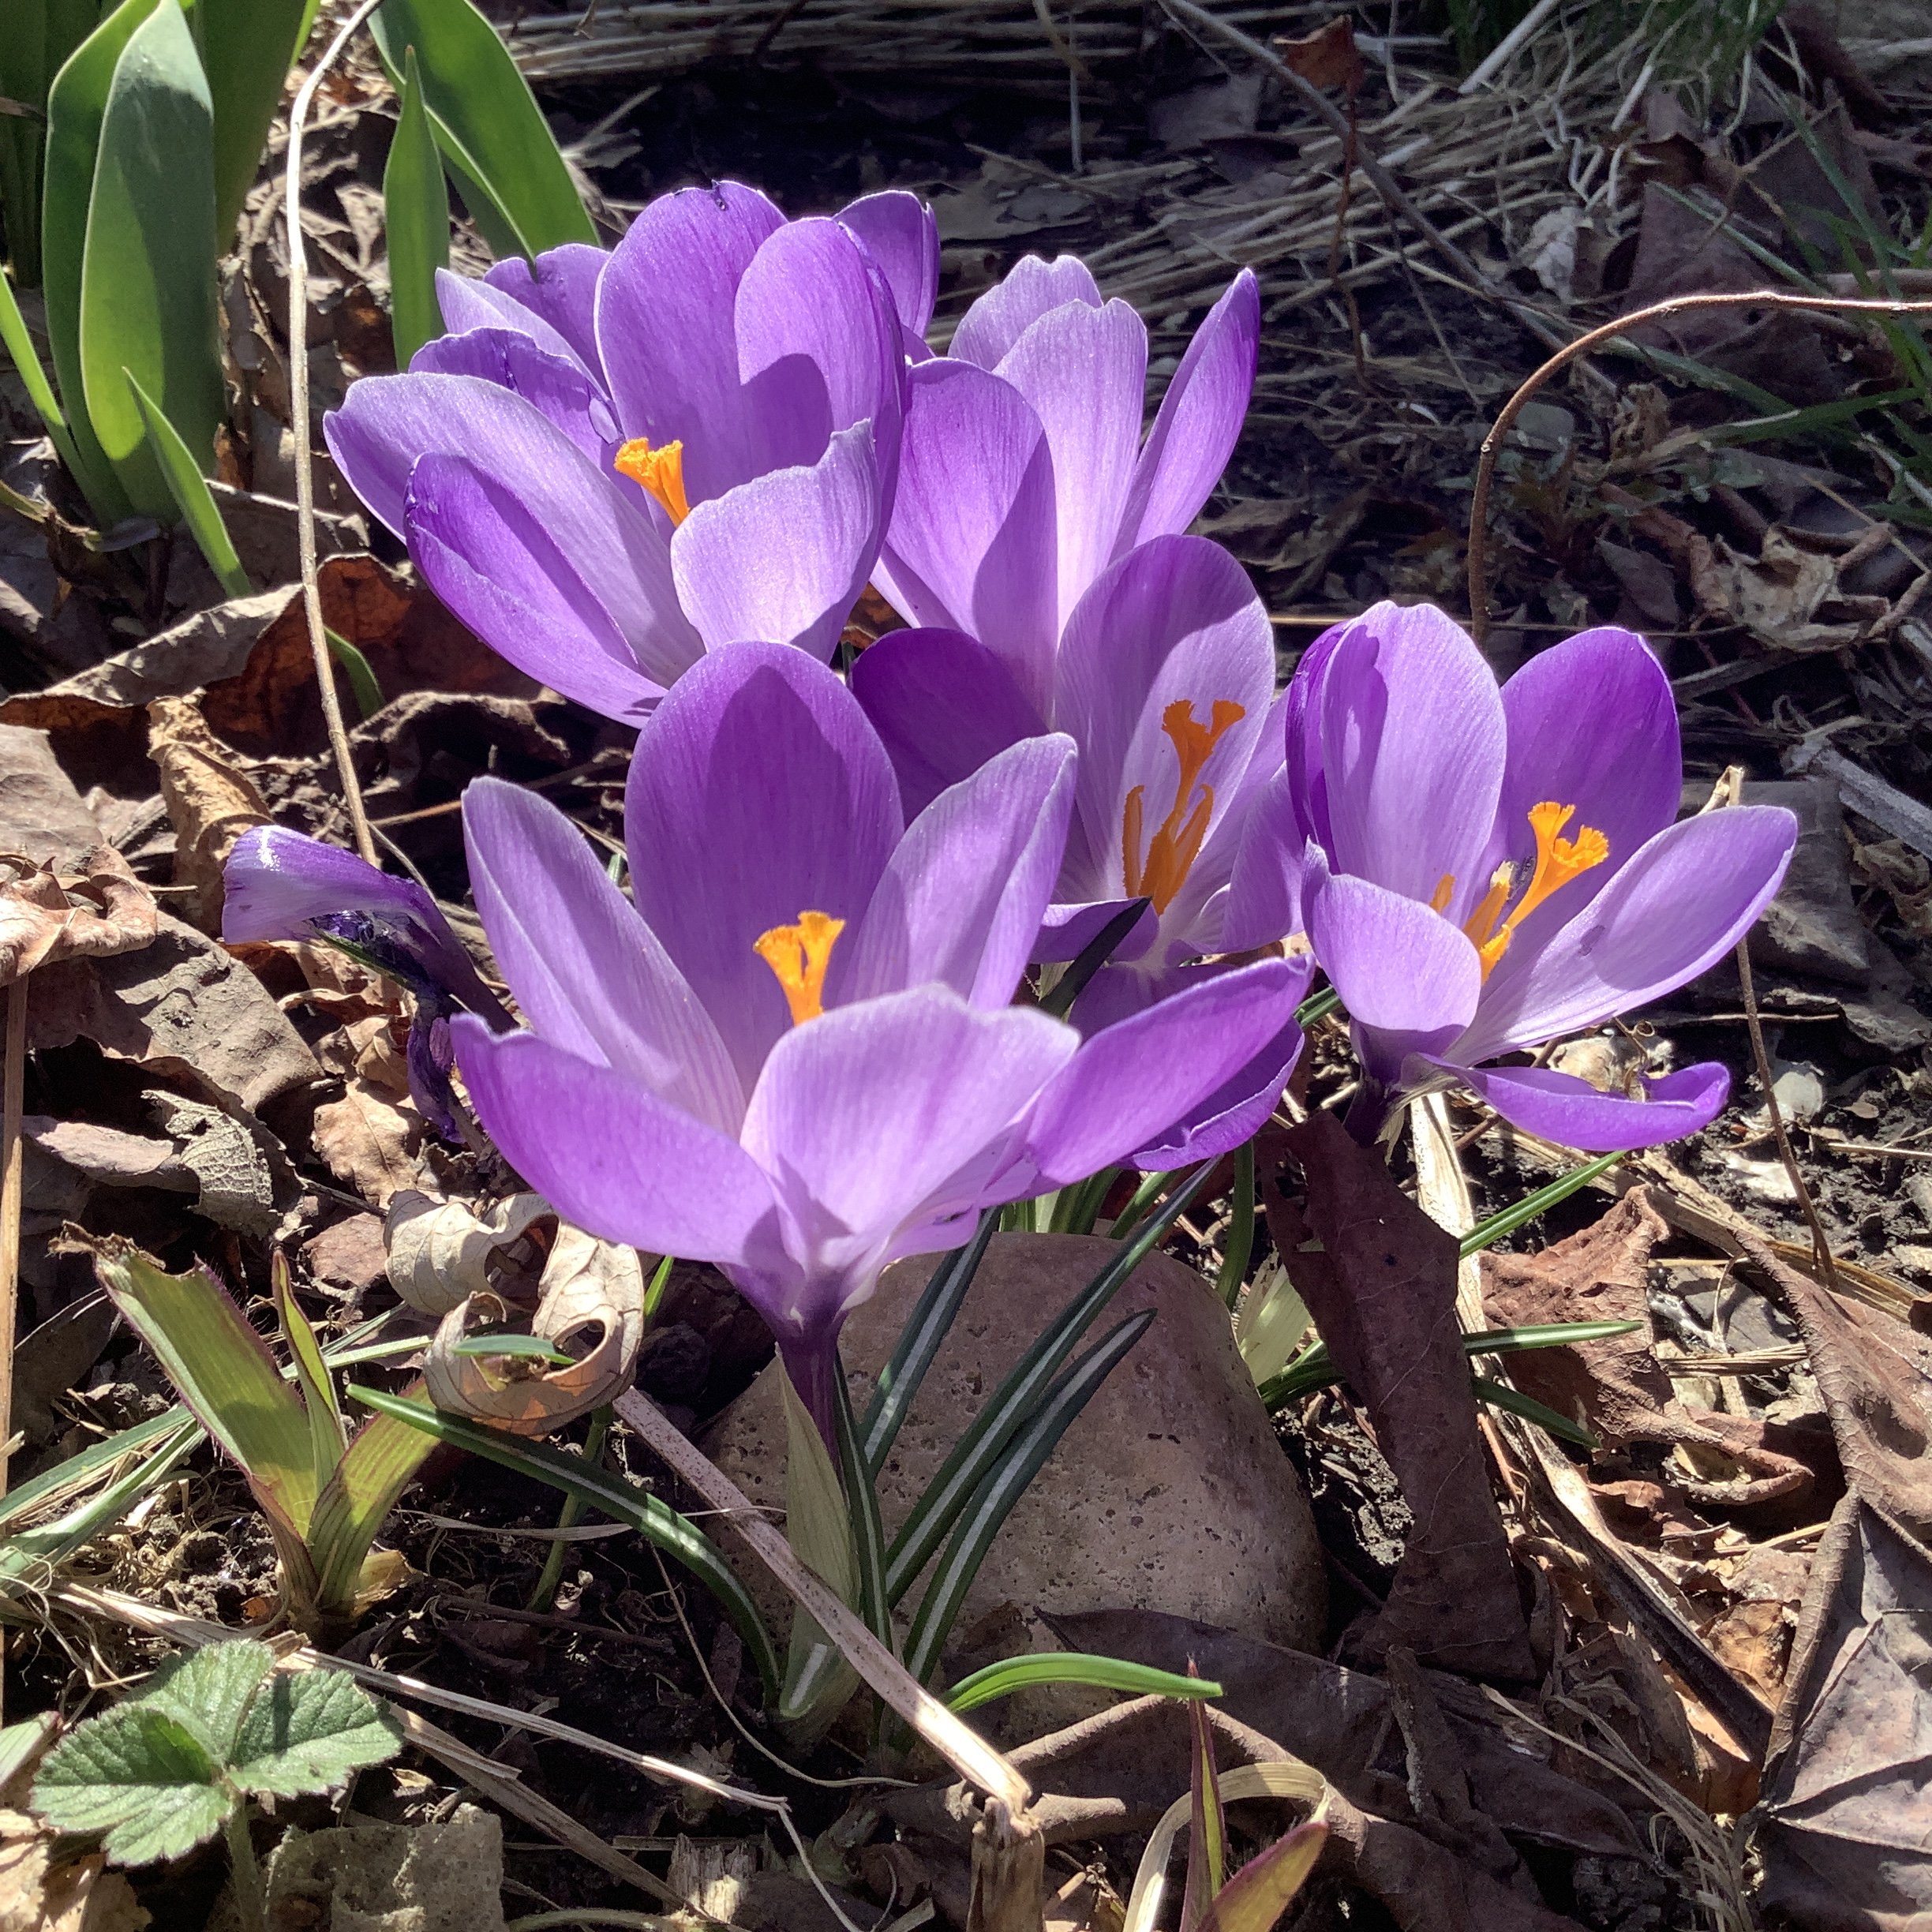 And more spring crocuses.